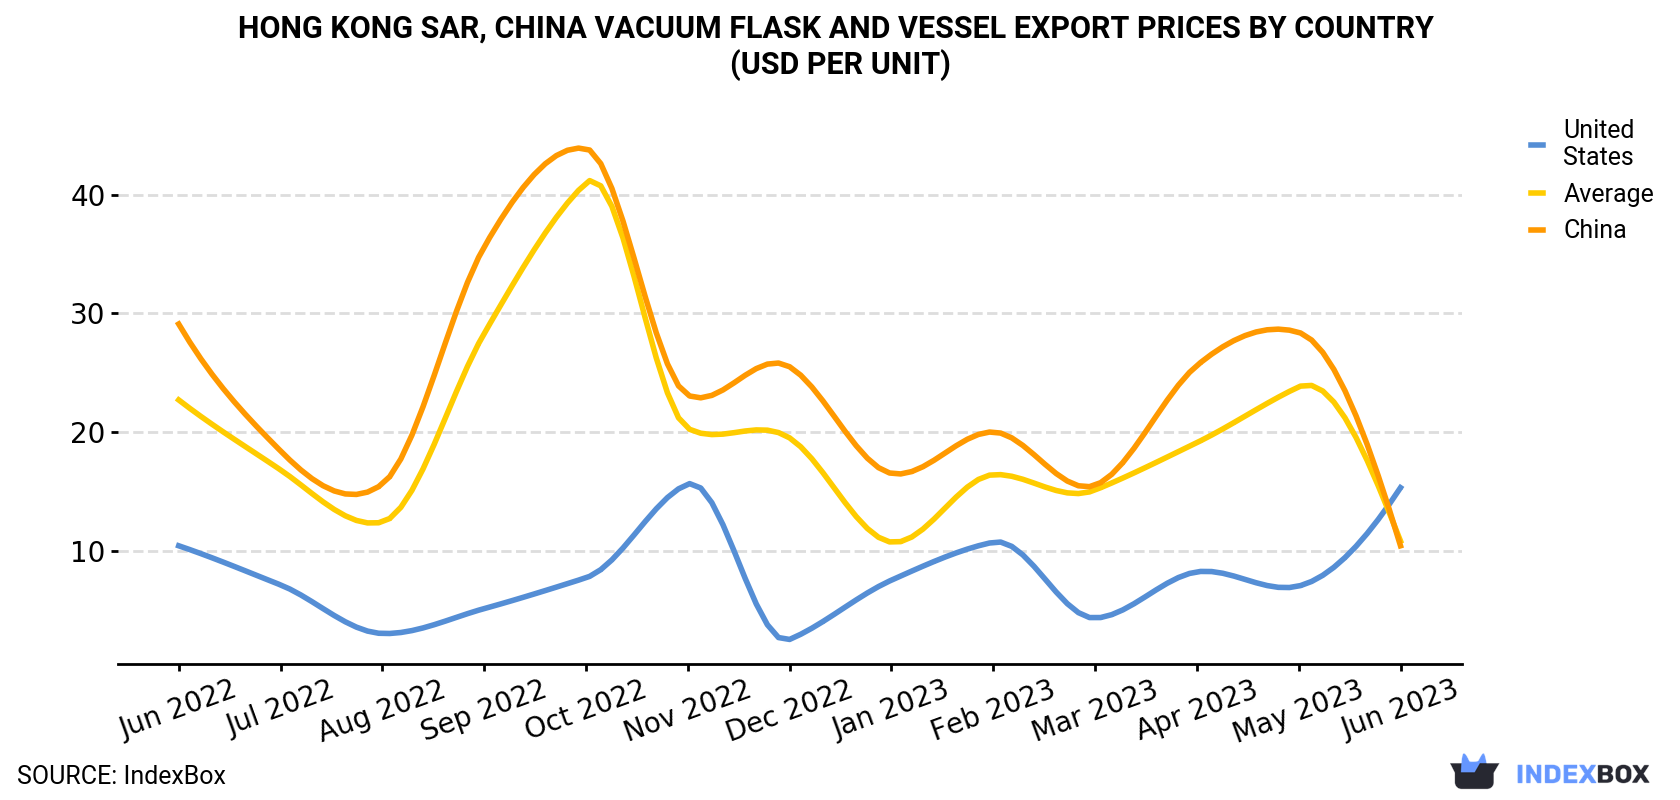 Hong Kong Vacuum Flask and Vessel Export Prices By Country (USD Per Unit)